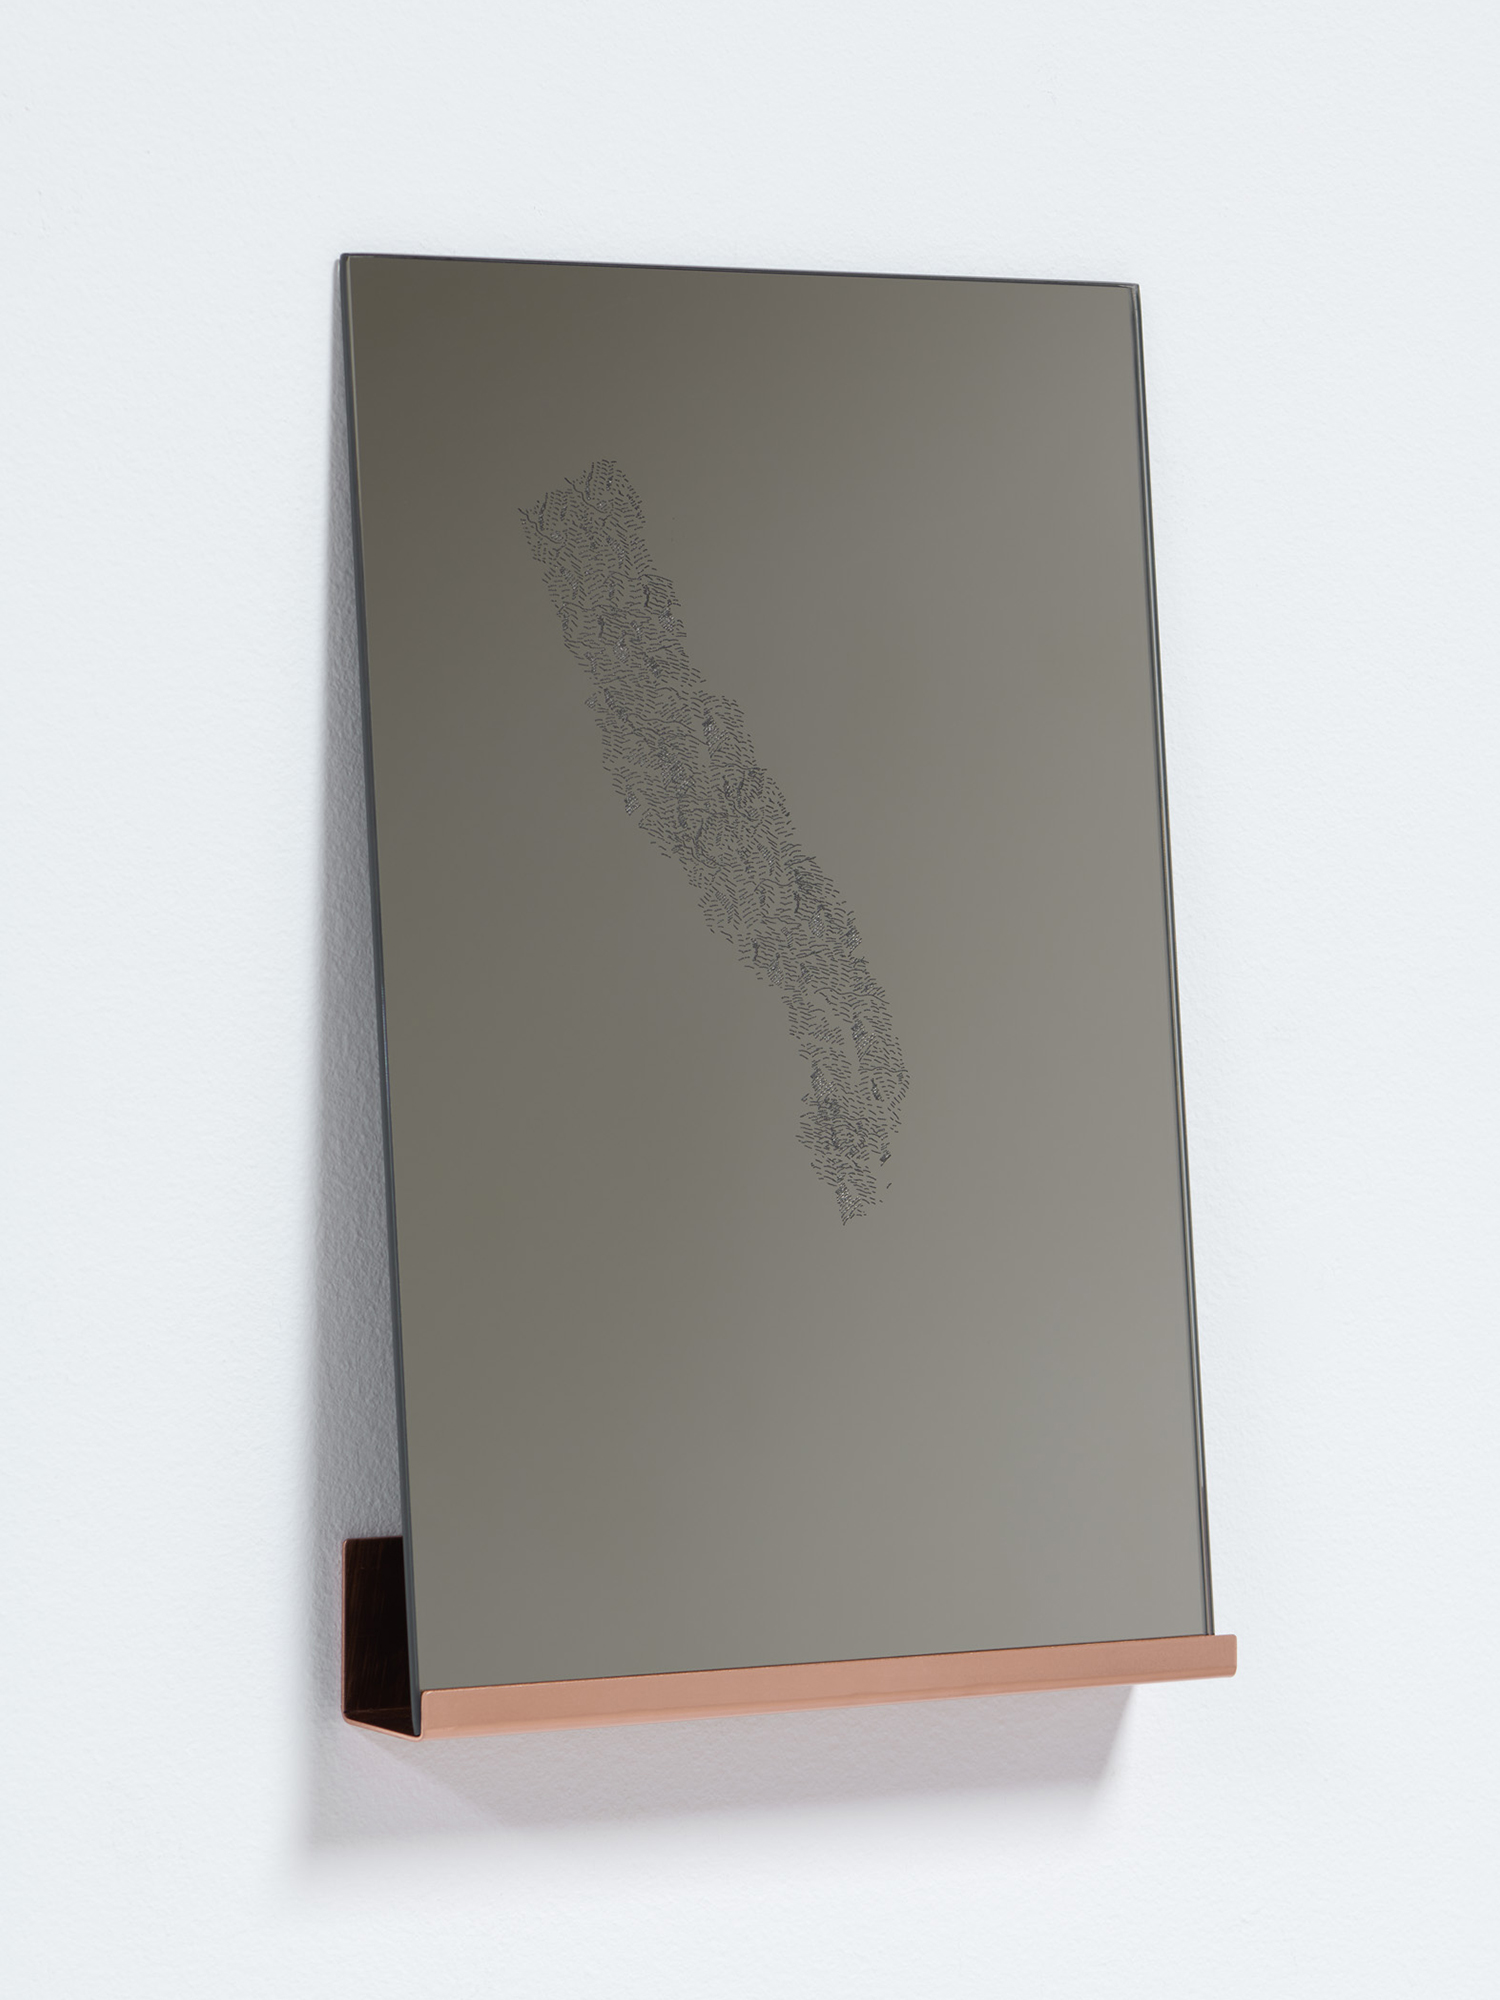 A-Place-Of-Water-Runoff_Mirror-Copper_11x17x2_2021